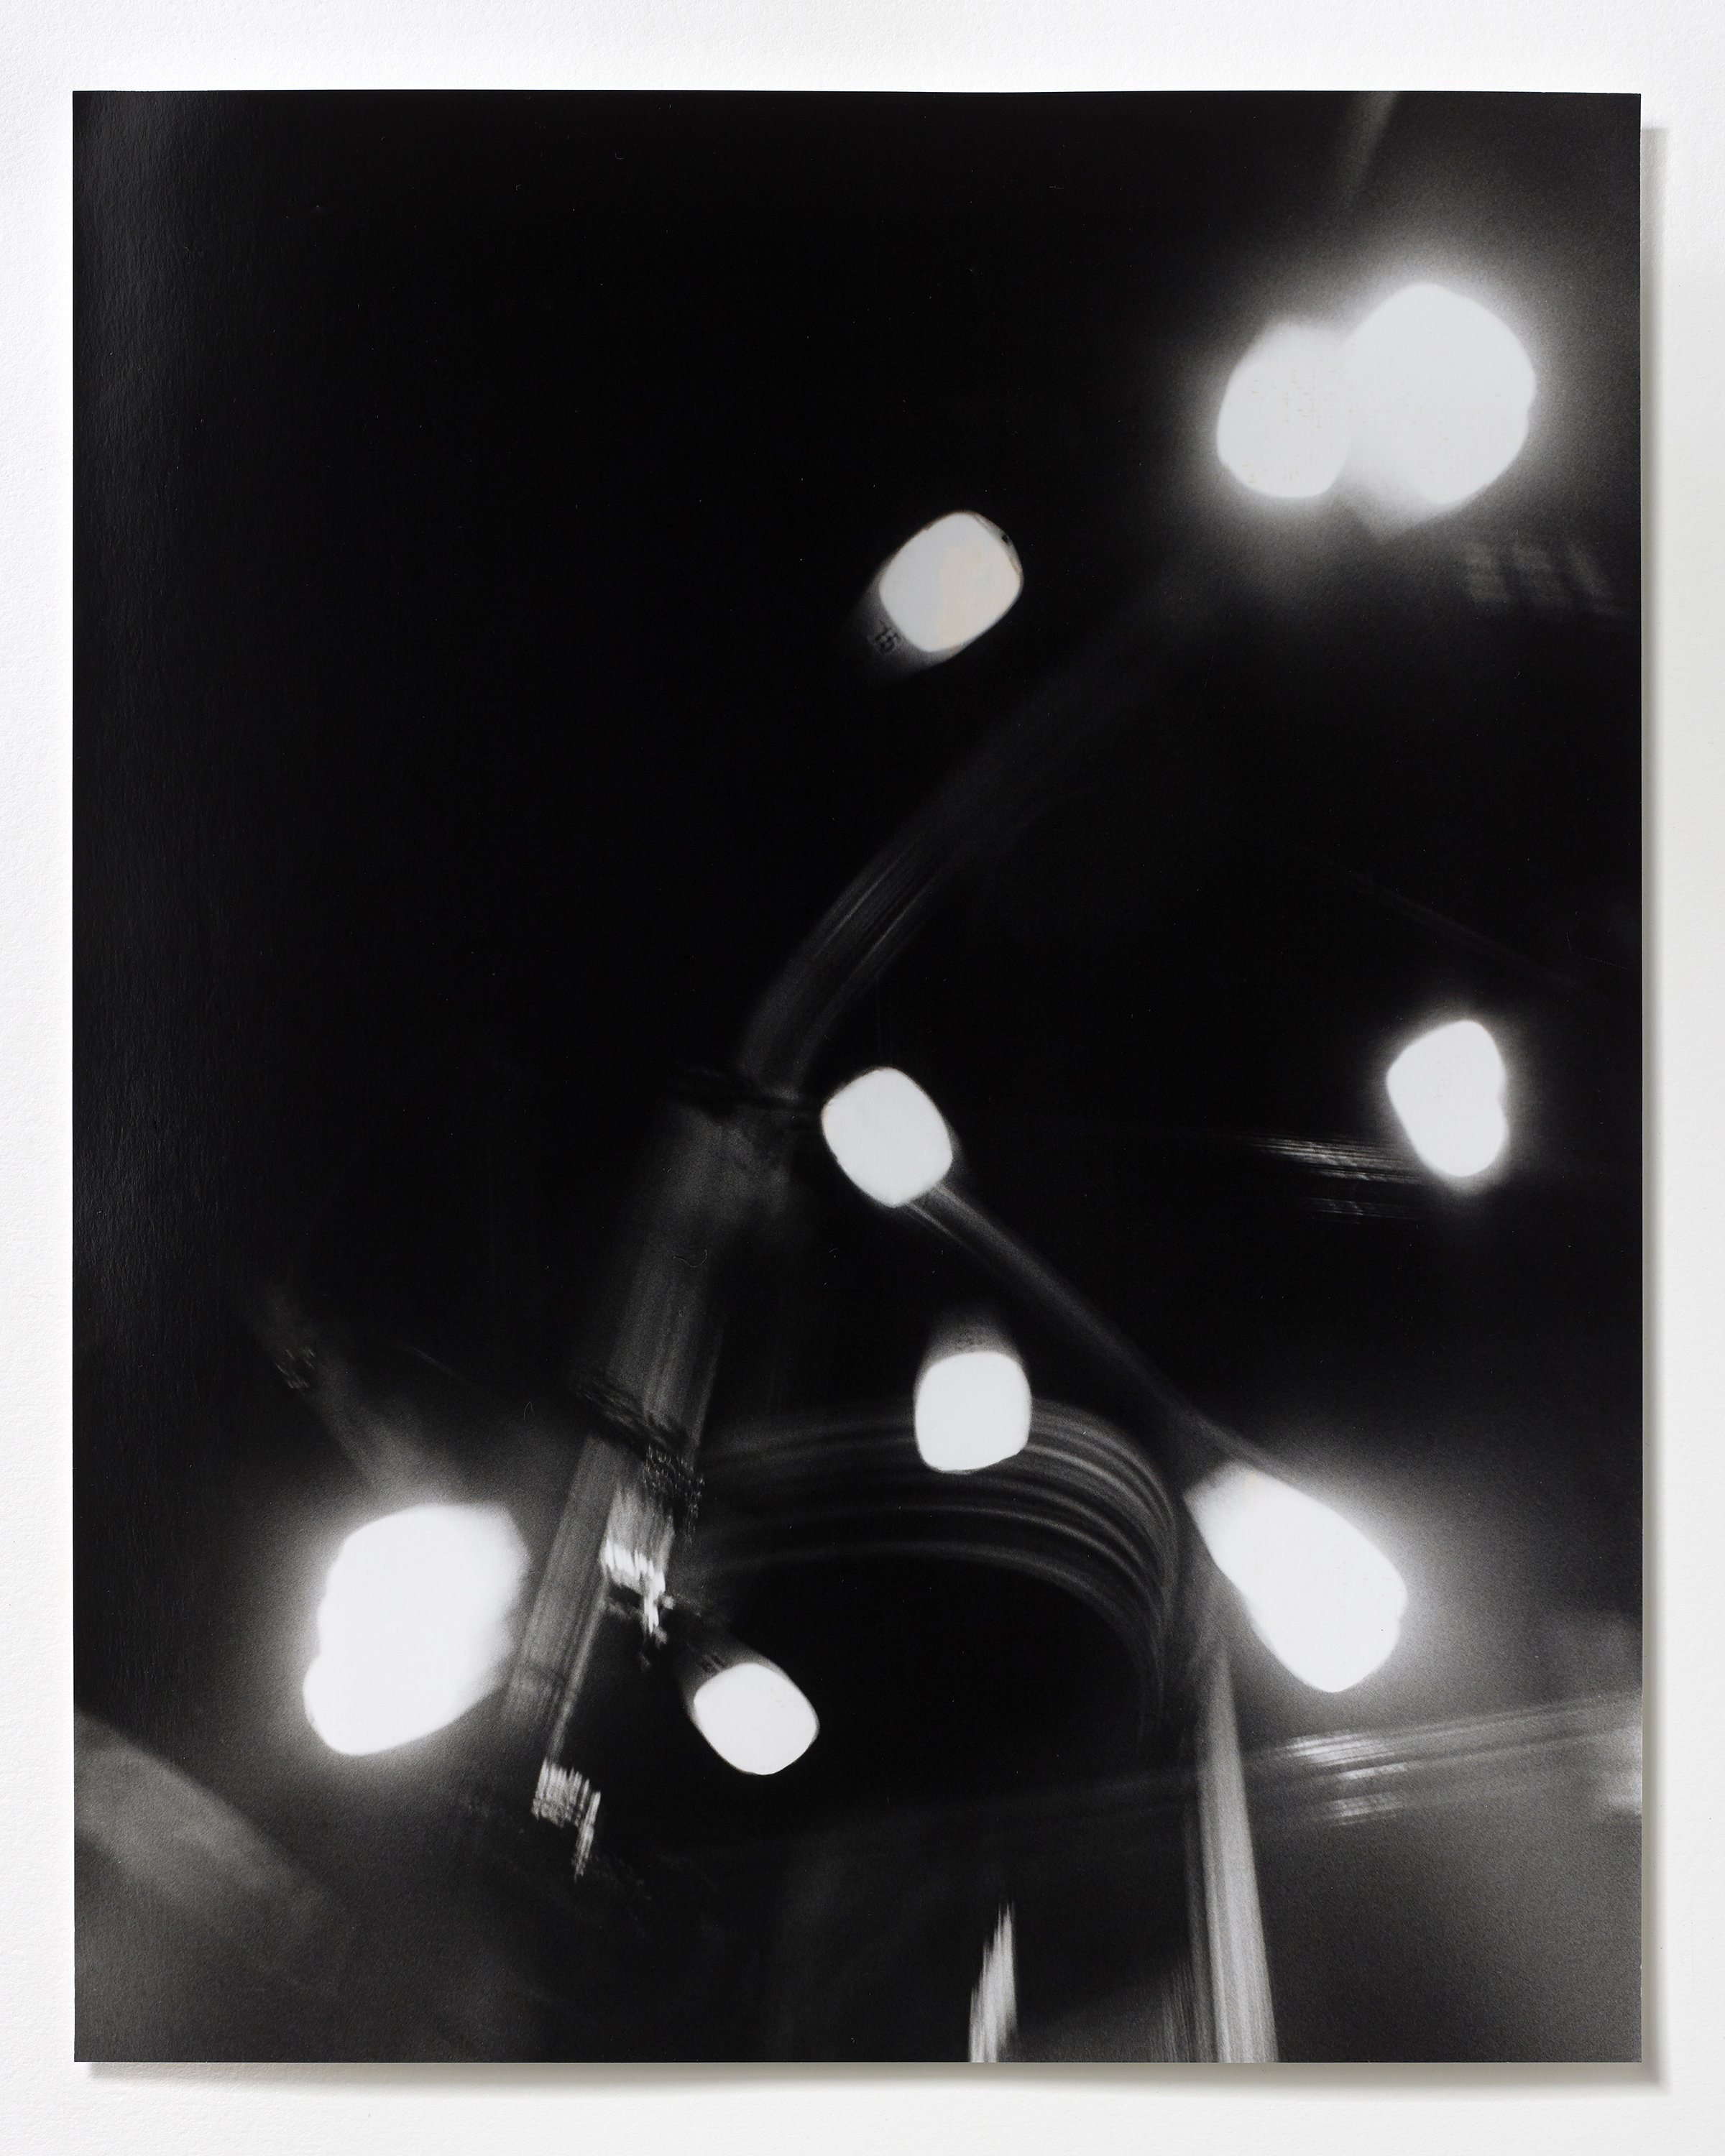 "40th Street and Park Avenue, facing North, #01, 9:42pm"